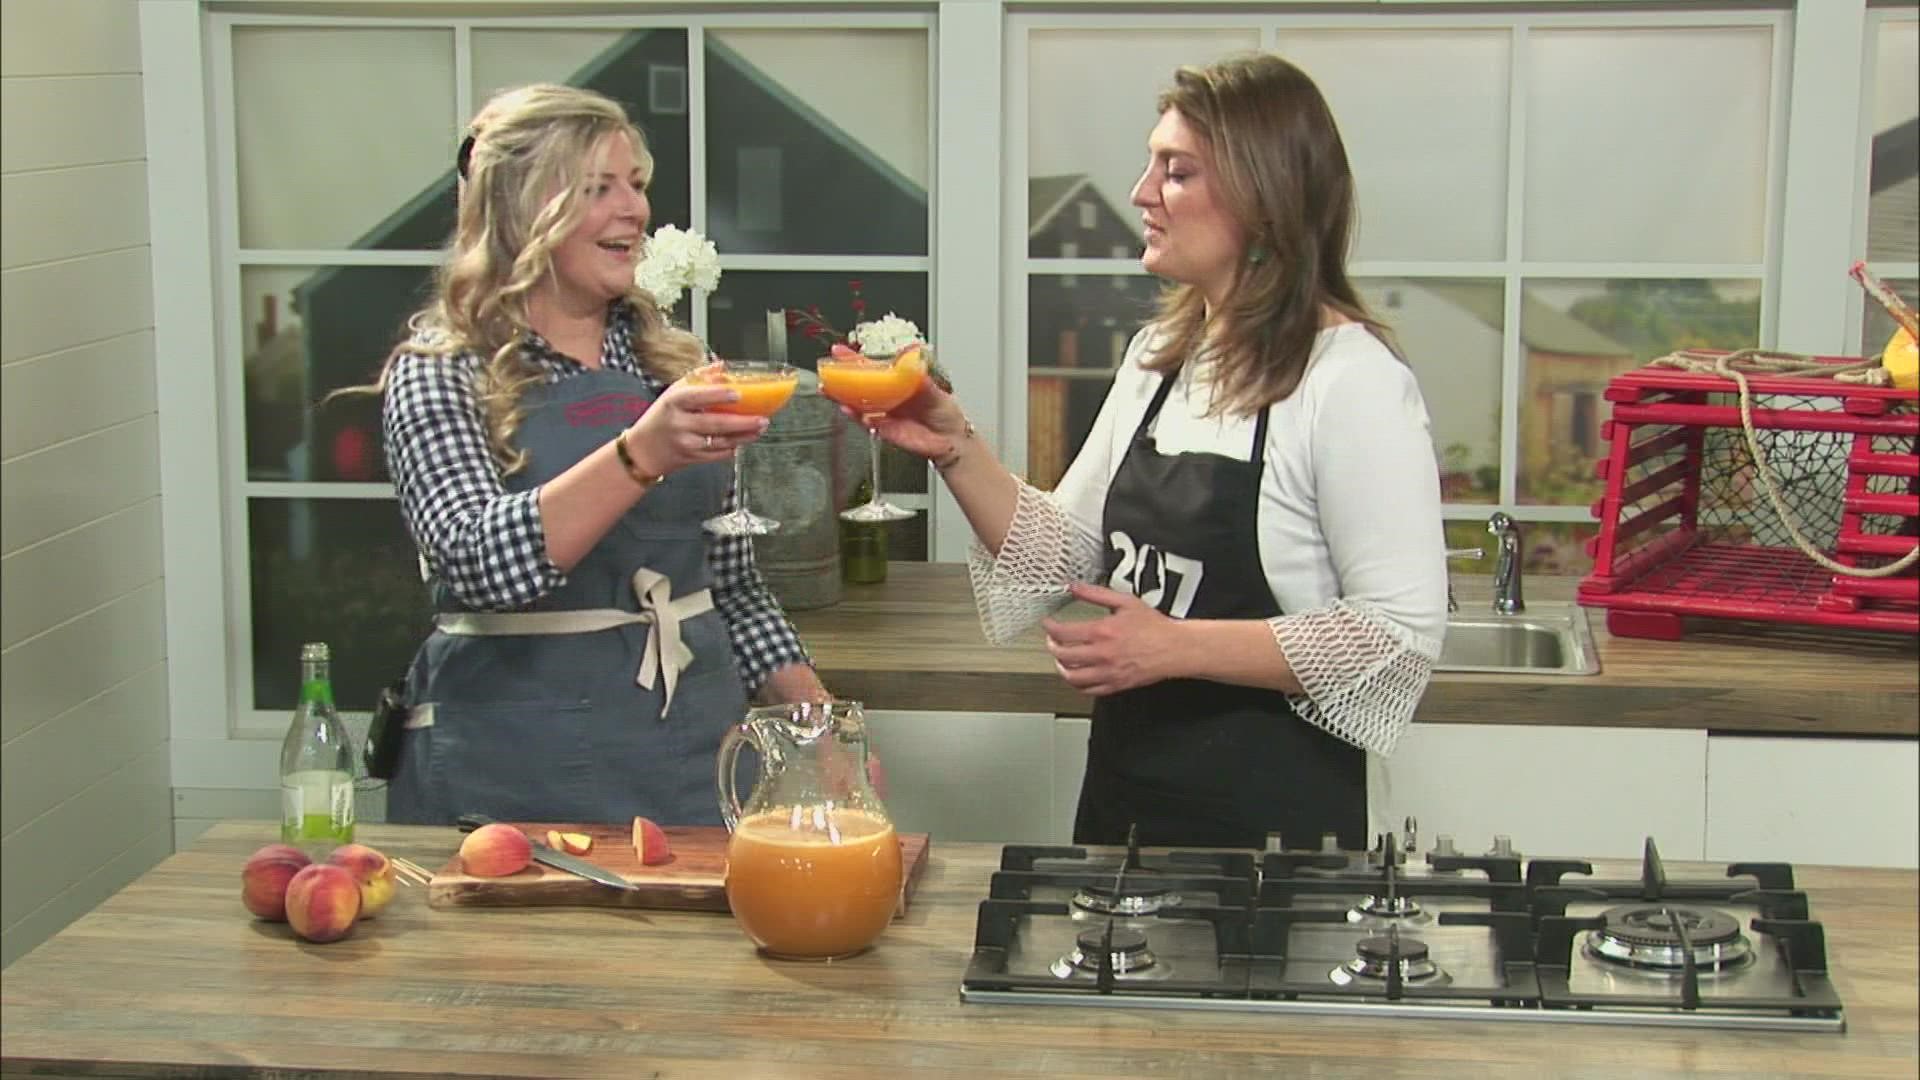 Tara Cannaday from Pot + Pan is in the 207 Kitchen showing us how to make a peach inspired mocktail.